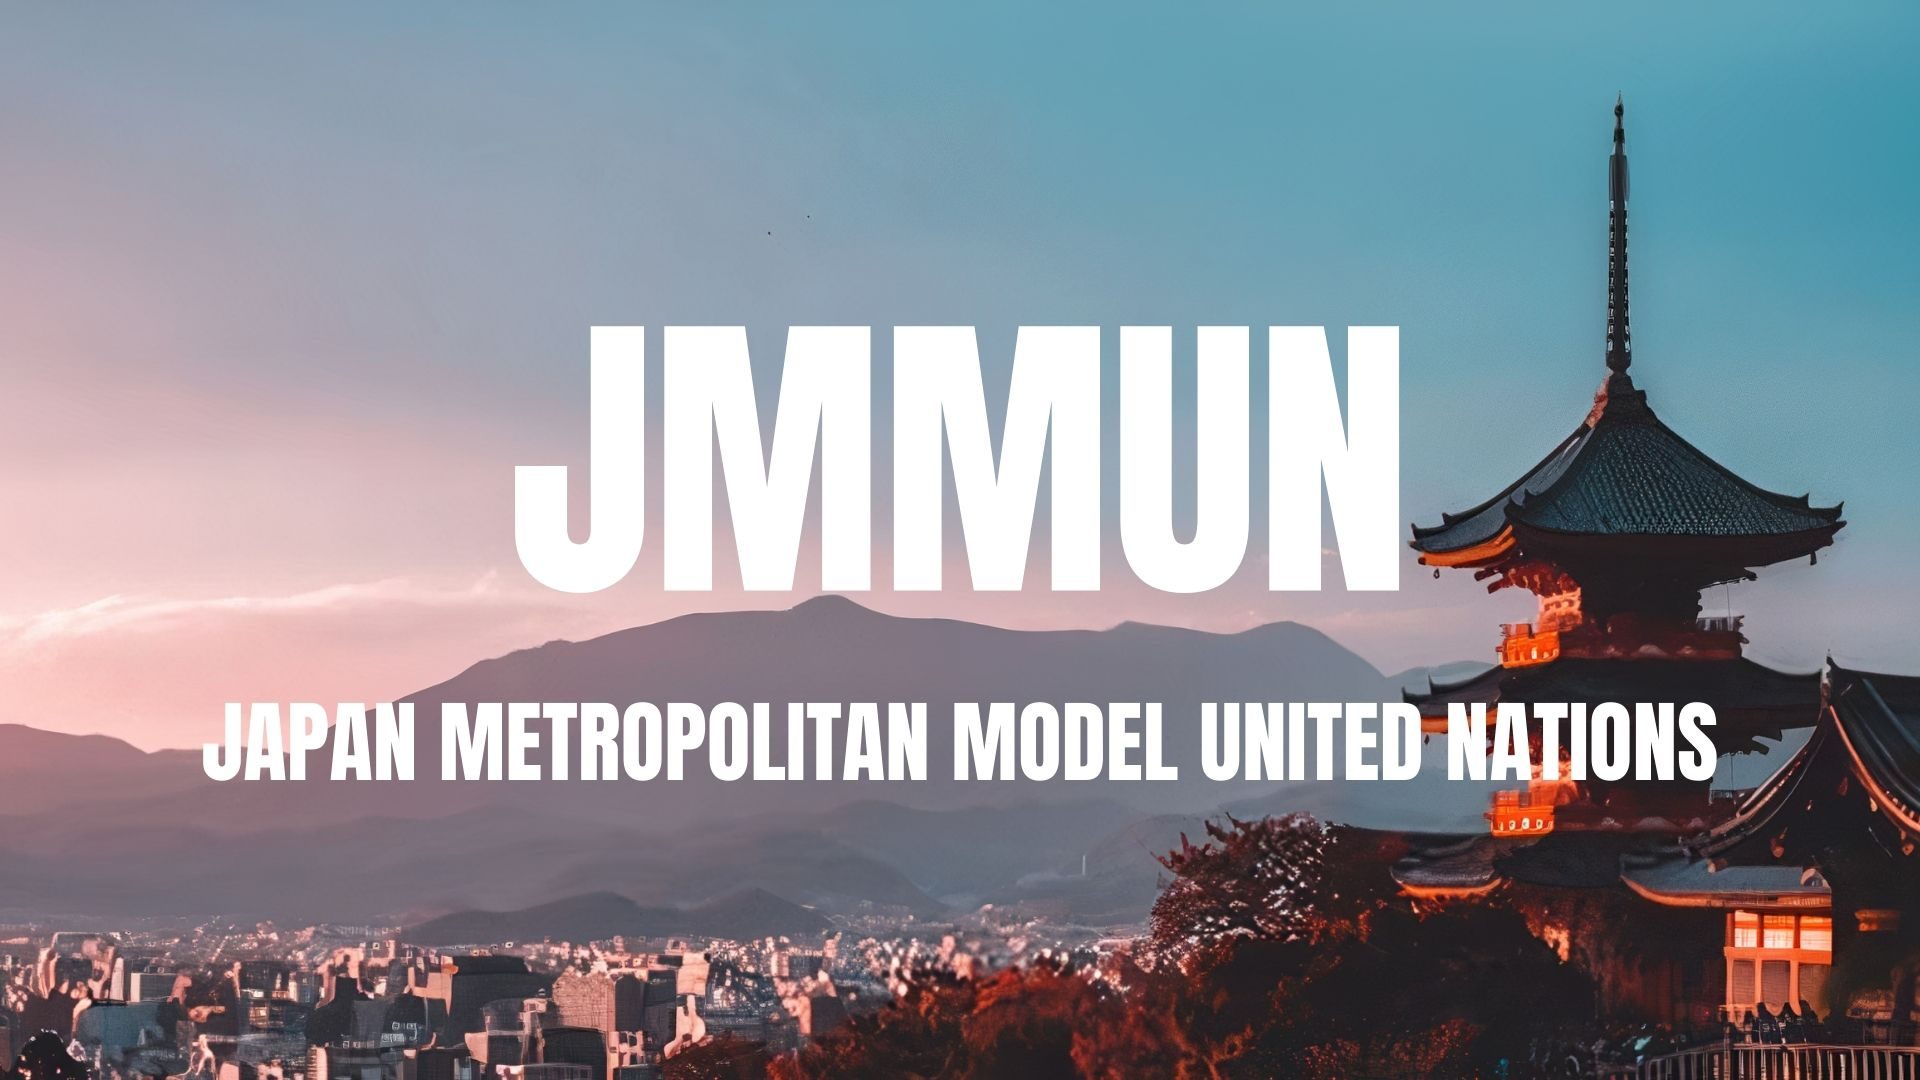 Background Guides for JMMUN 2022 Have Been Published!